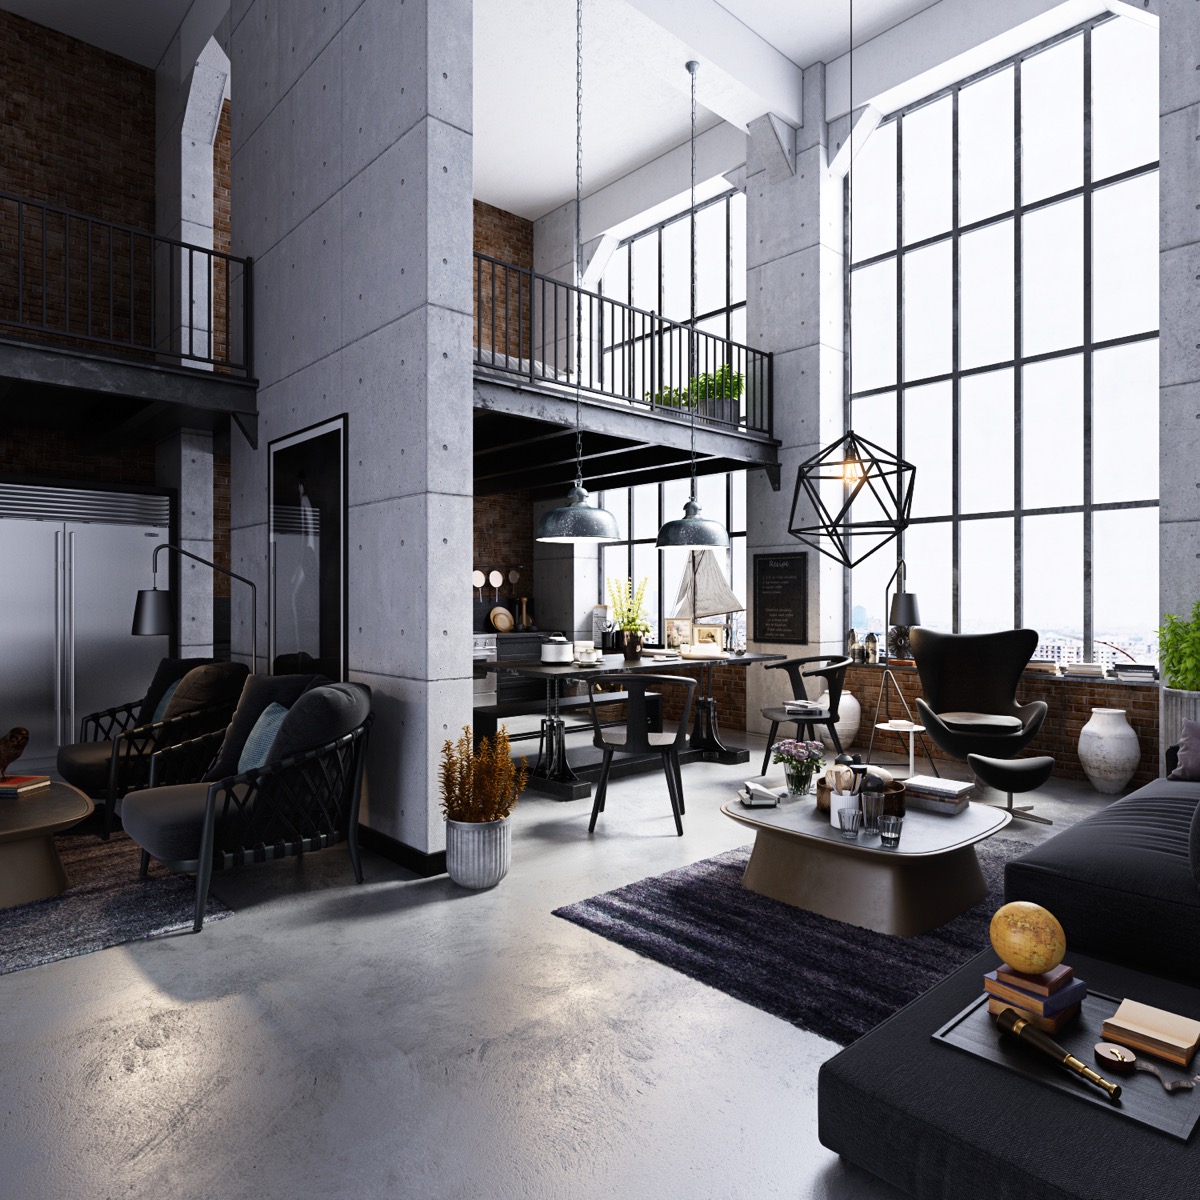 High Ceilings Factory Windows Industrial Living Room Decor 